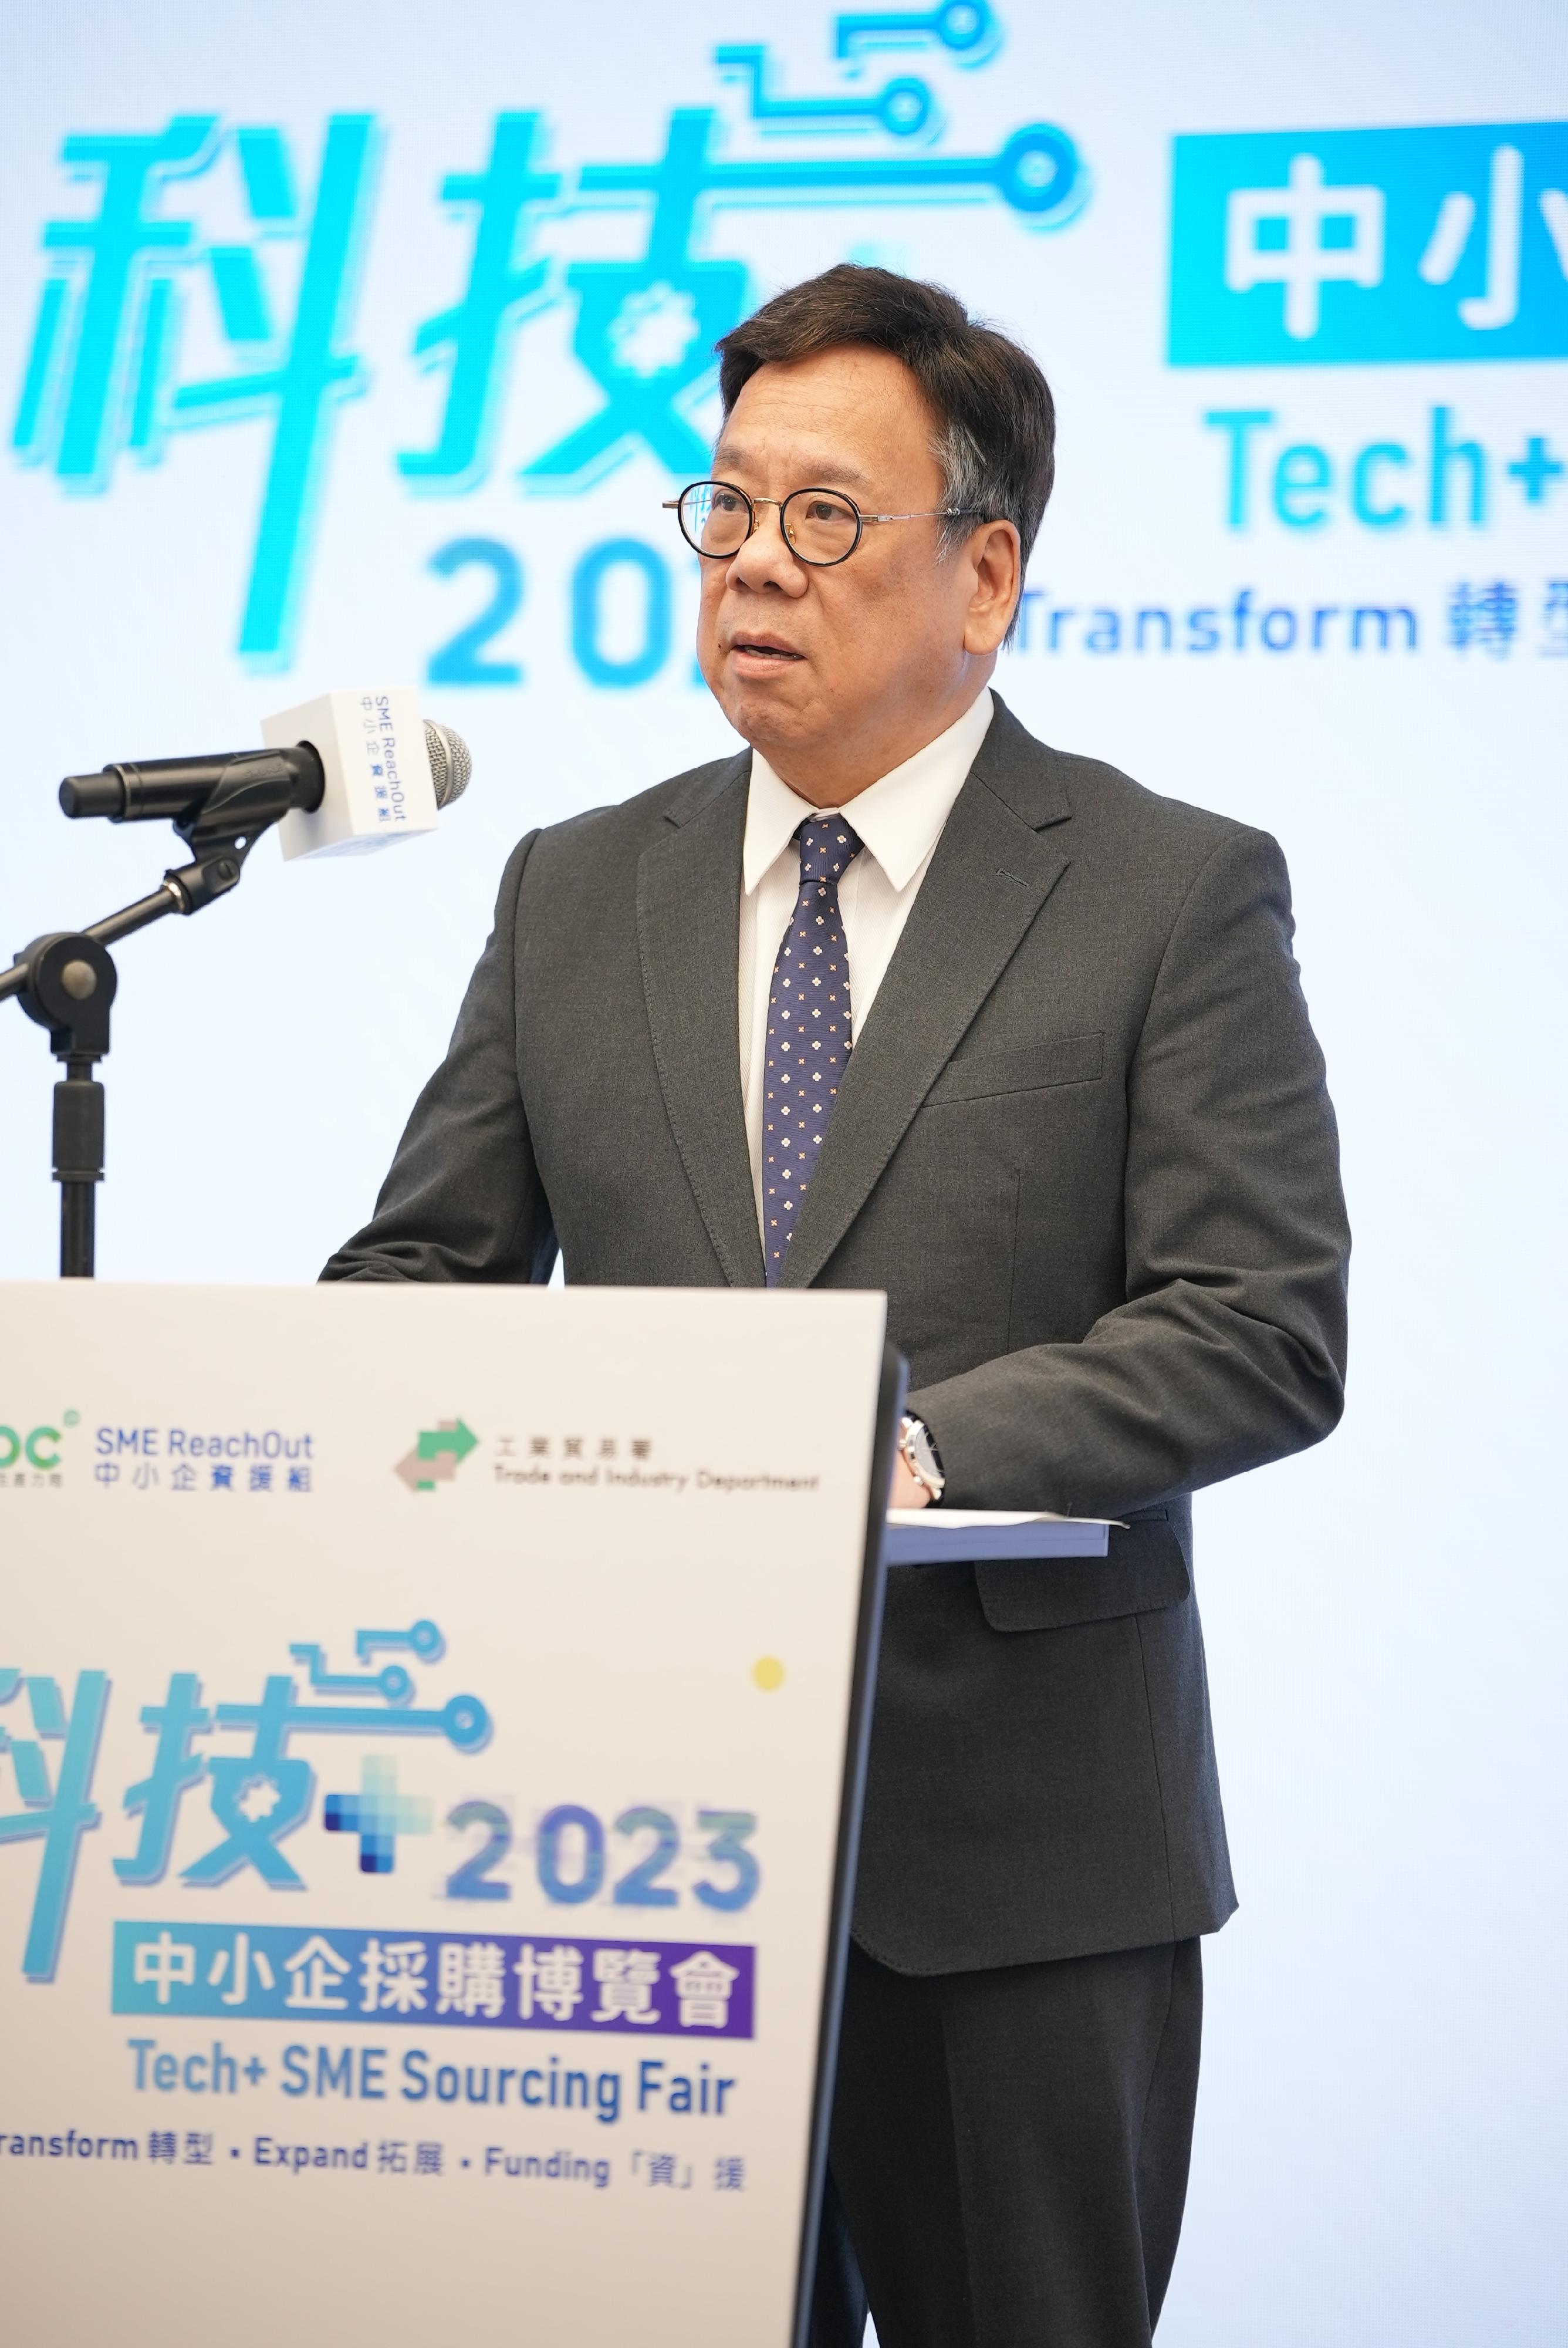 The Secretary for Commerce and Economic Development, Mr Algernon Yau, speaks at the opening ceremony of the "SME ReachOut: Tech+ SME Sourcing Fair 2023" today (October 10).